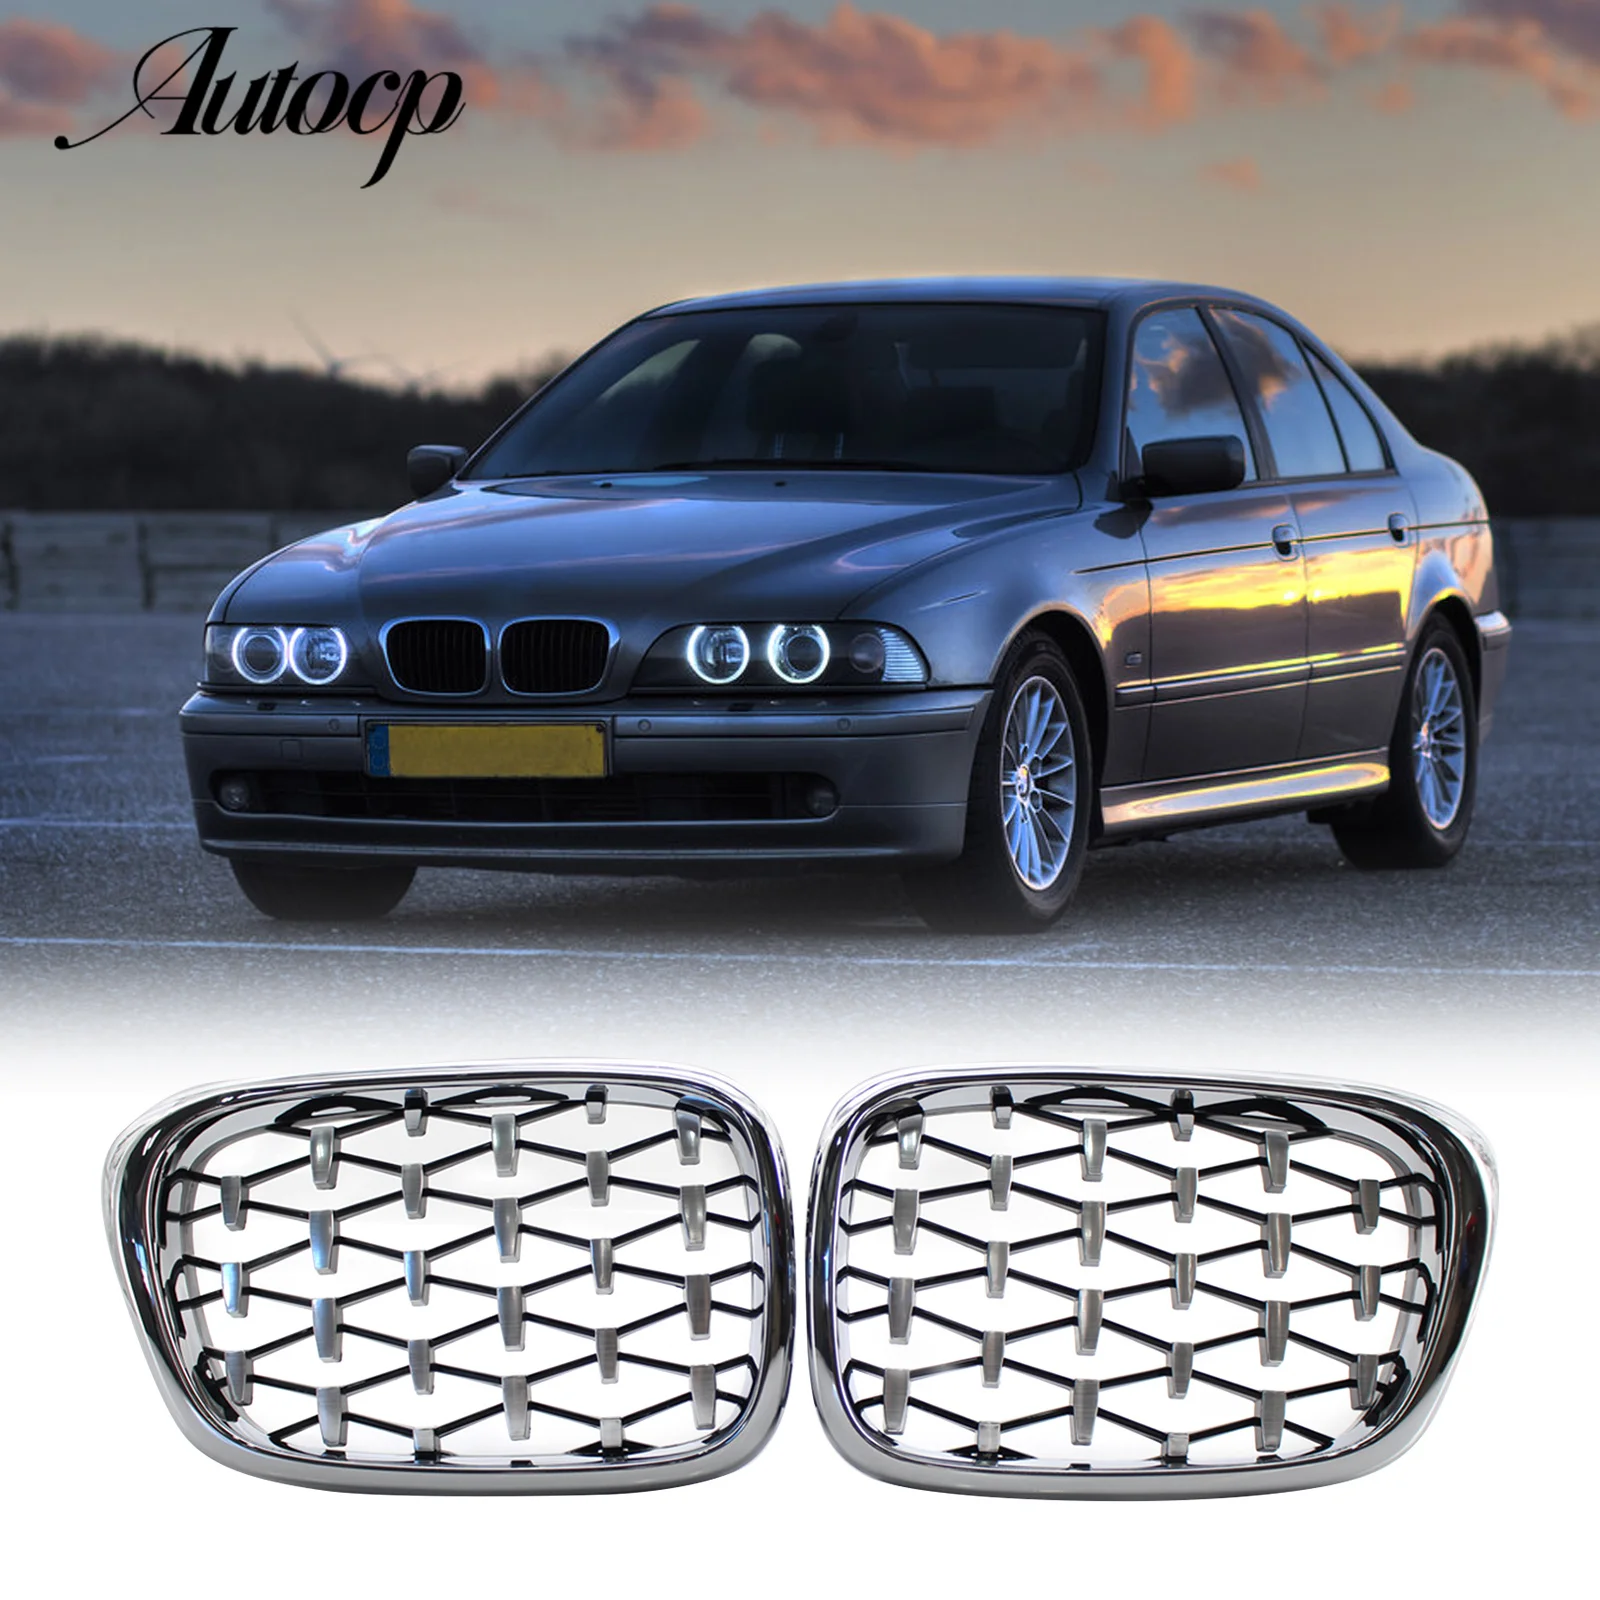 

2PCS Front Kidney Chrome Grille Diamond Meteor Fit For 5 Series BMW E39 M5 1999-2003 51137005837 51137005838